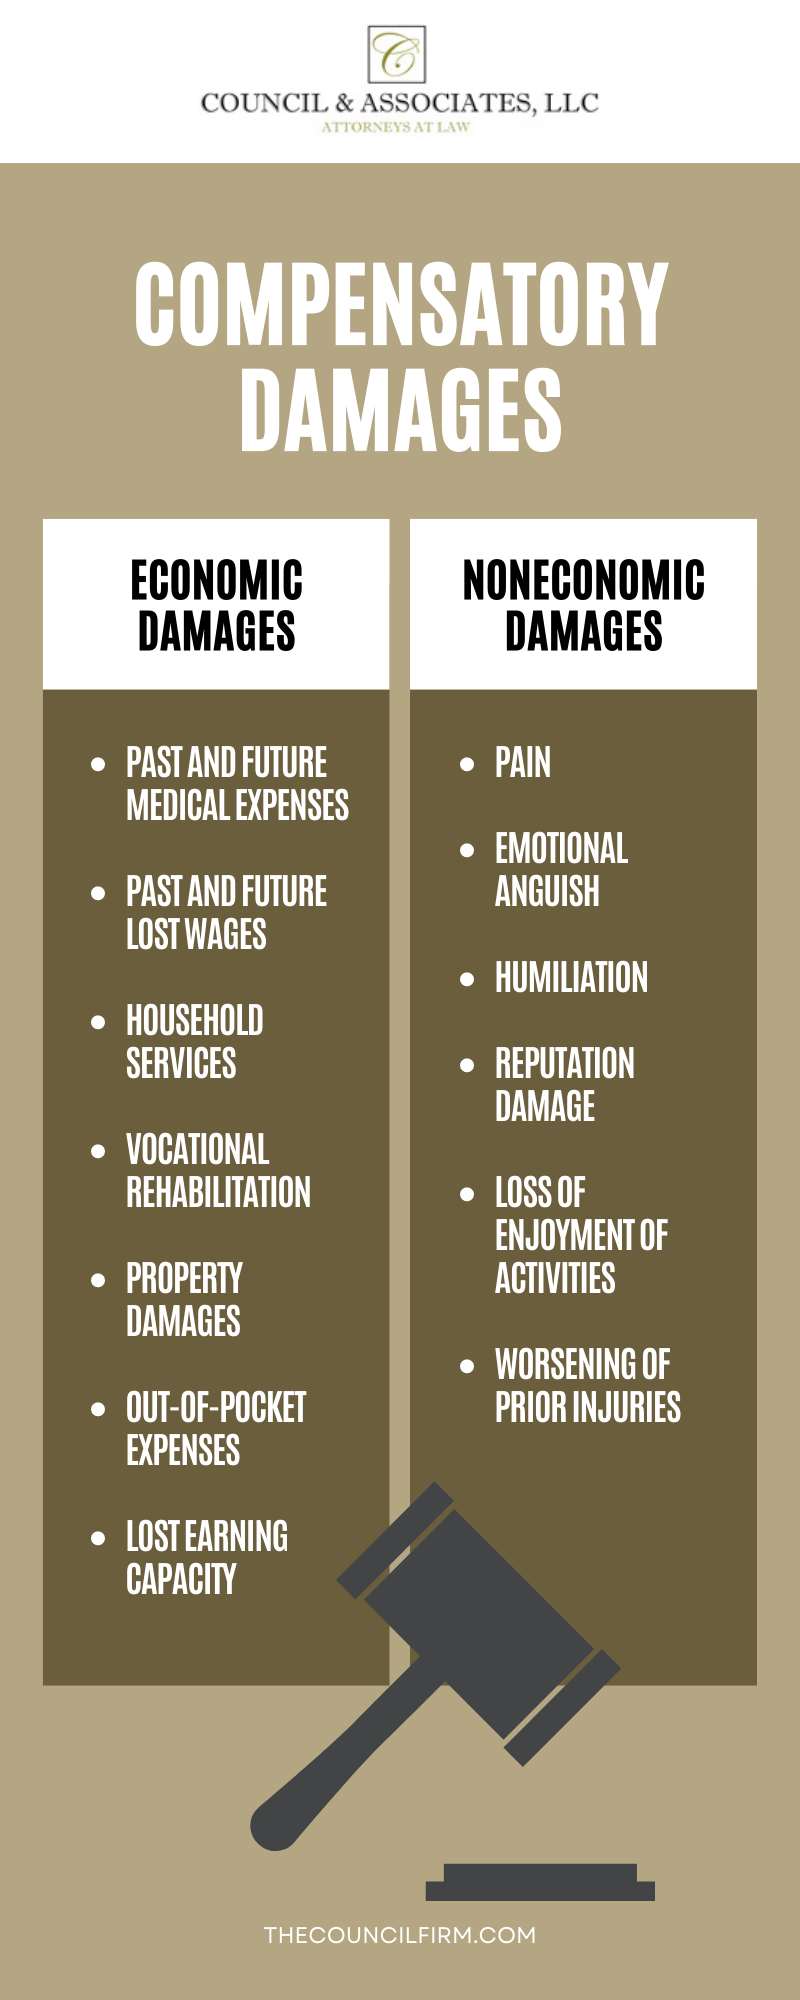 COMPENSATORY DAMAGES INFOGRAPHIC